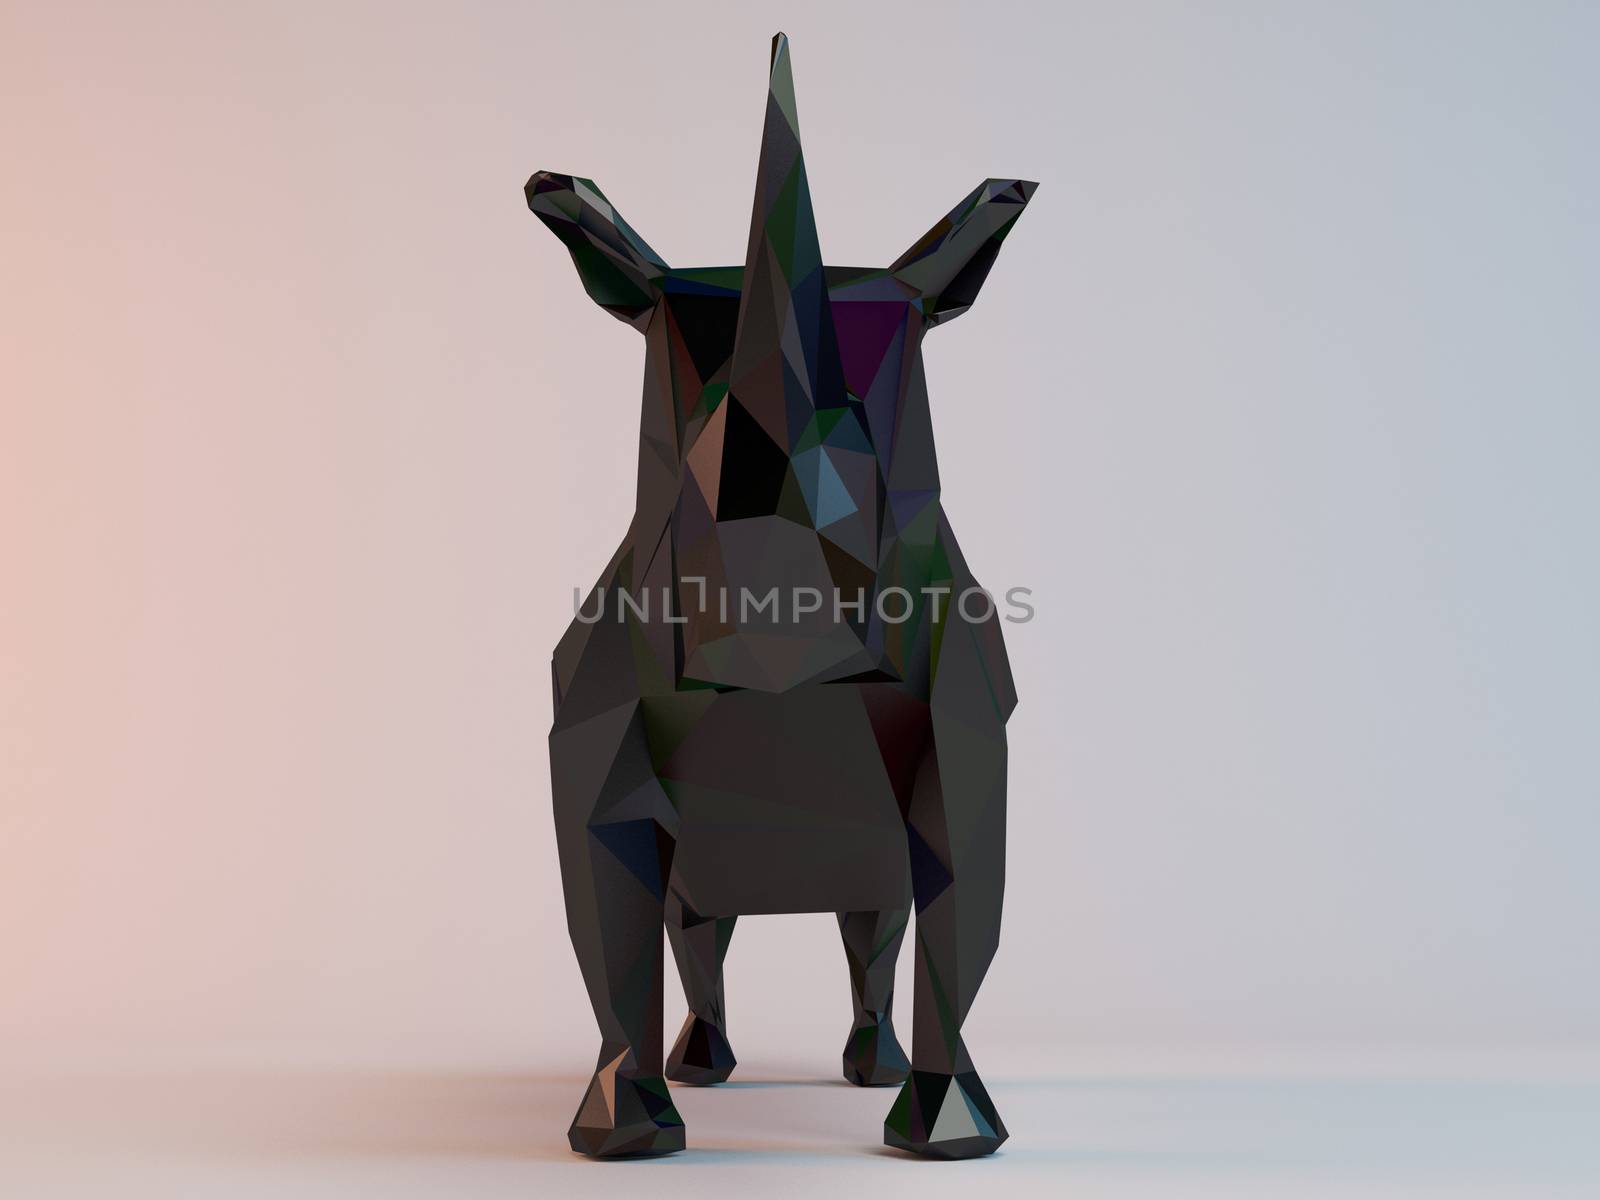 3D black low poly (rhinoceros) inside a white stage with high render quality to be used as a logo, medal, symbol, shape, emblem, icon, children story, or any other use.